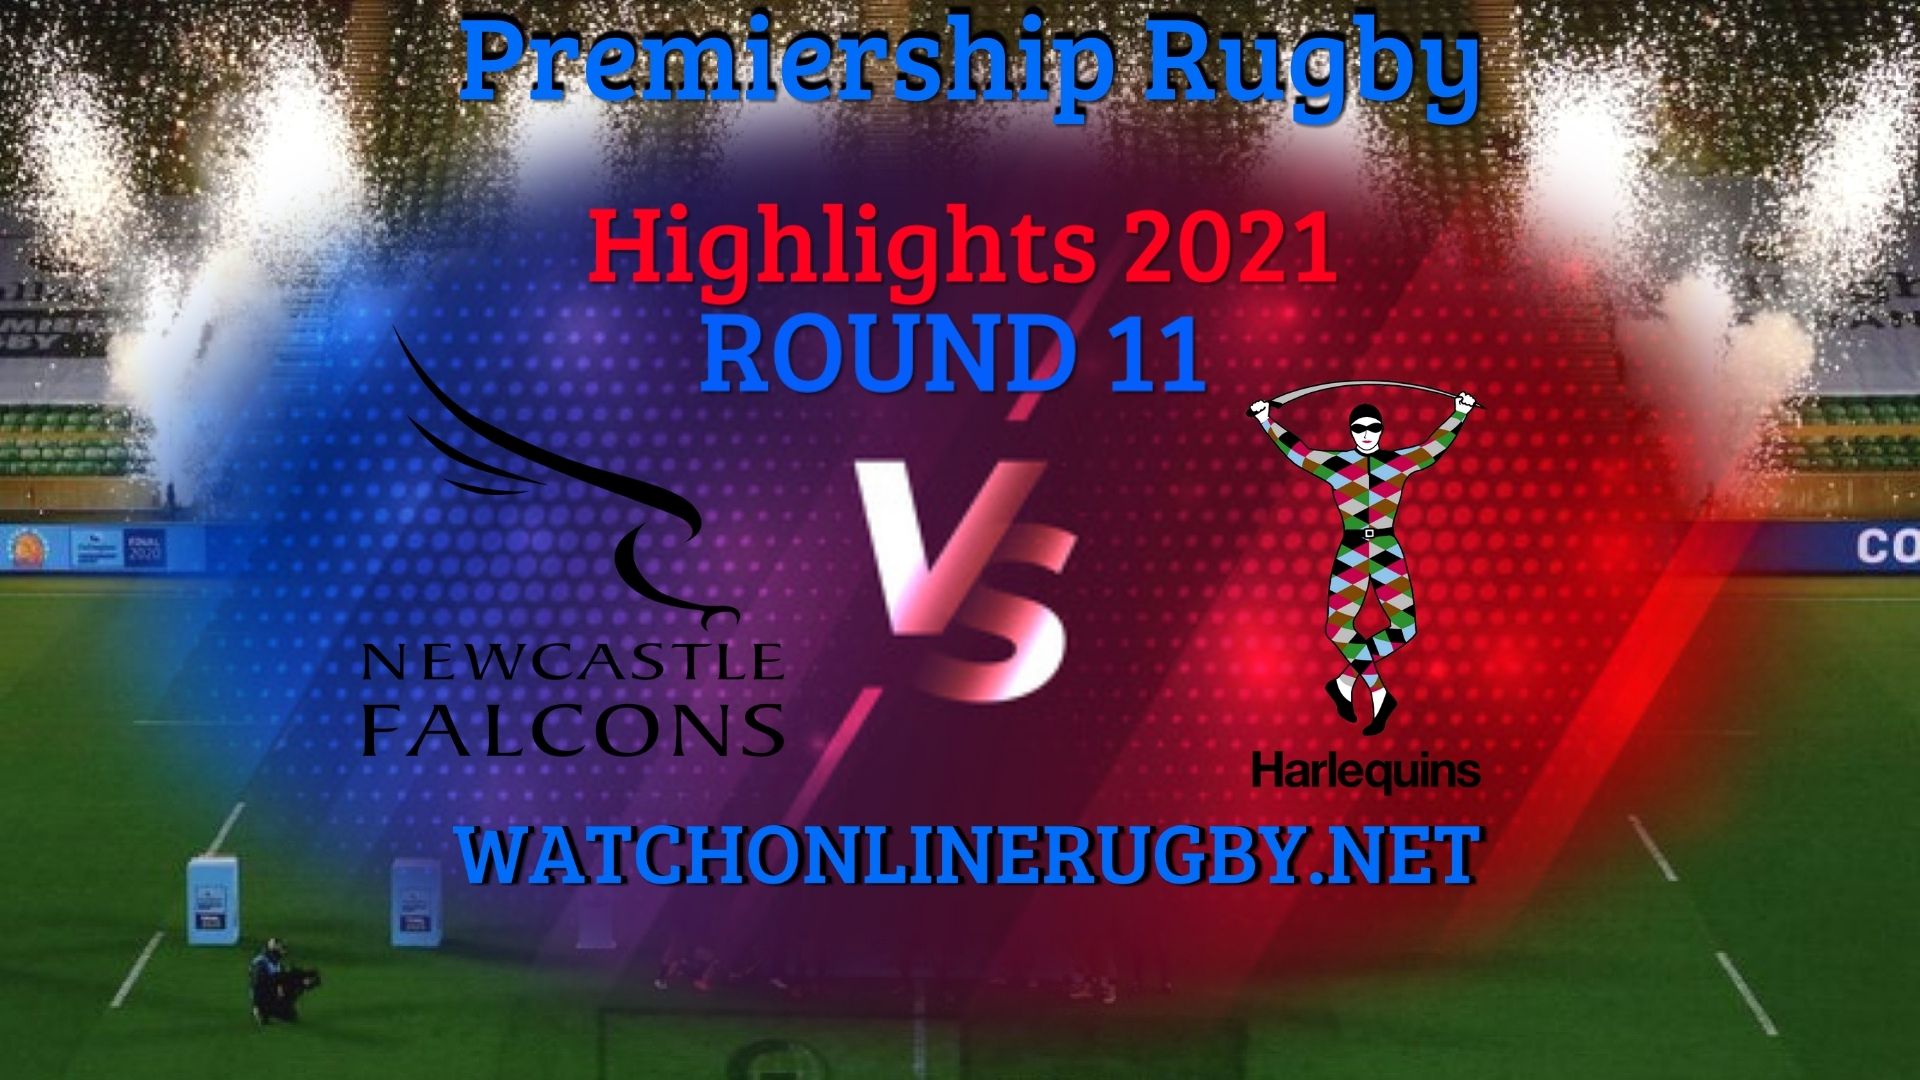 Newcastle Falcons Vs Harlequins Premiership Rugby 2021 RD 11